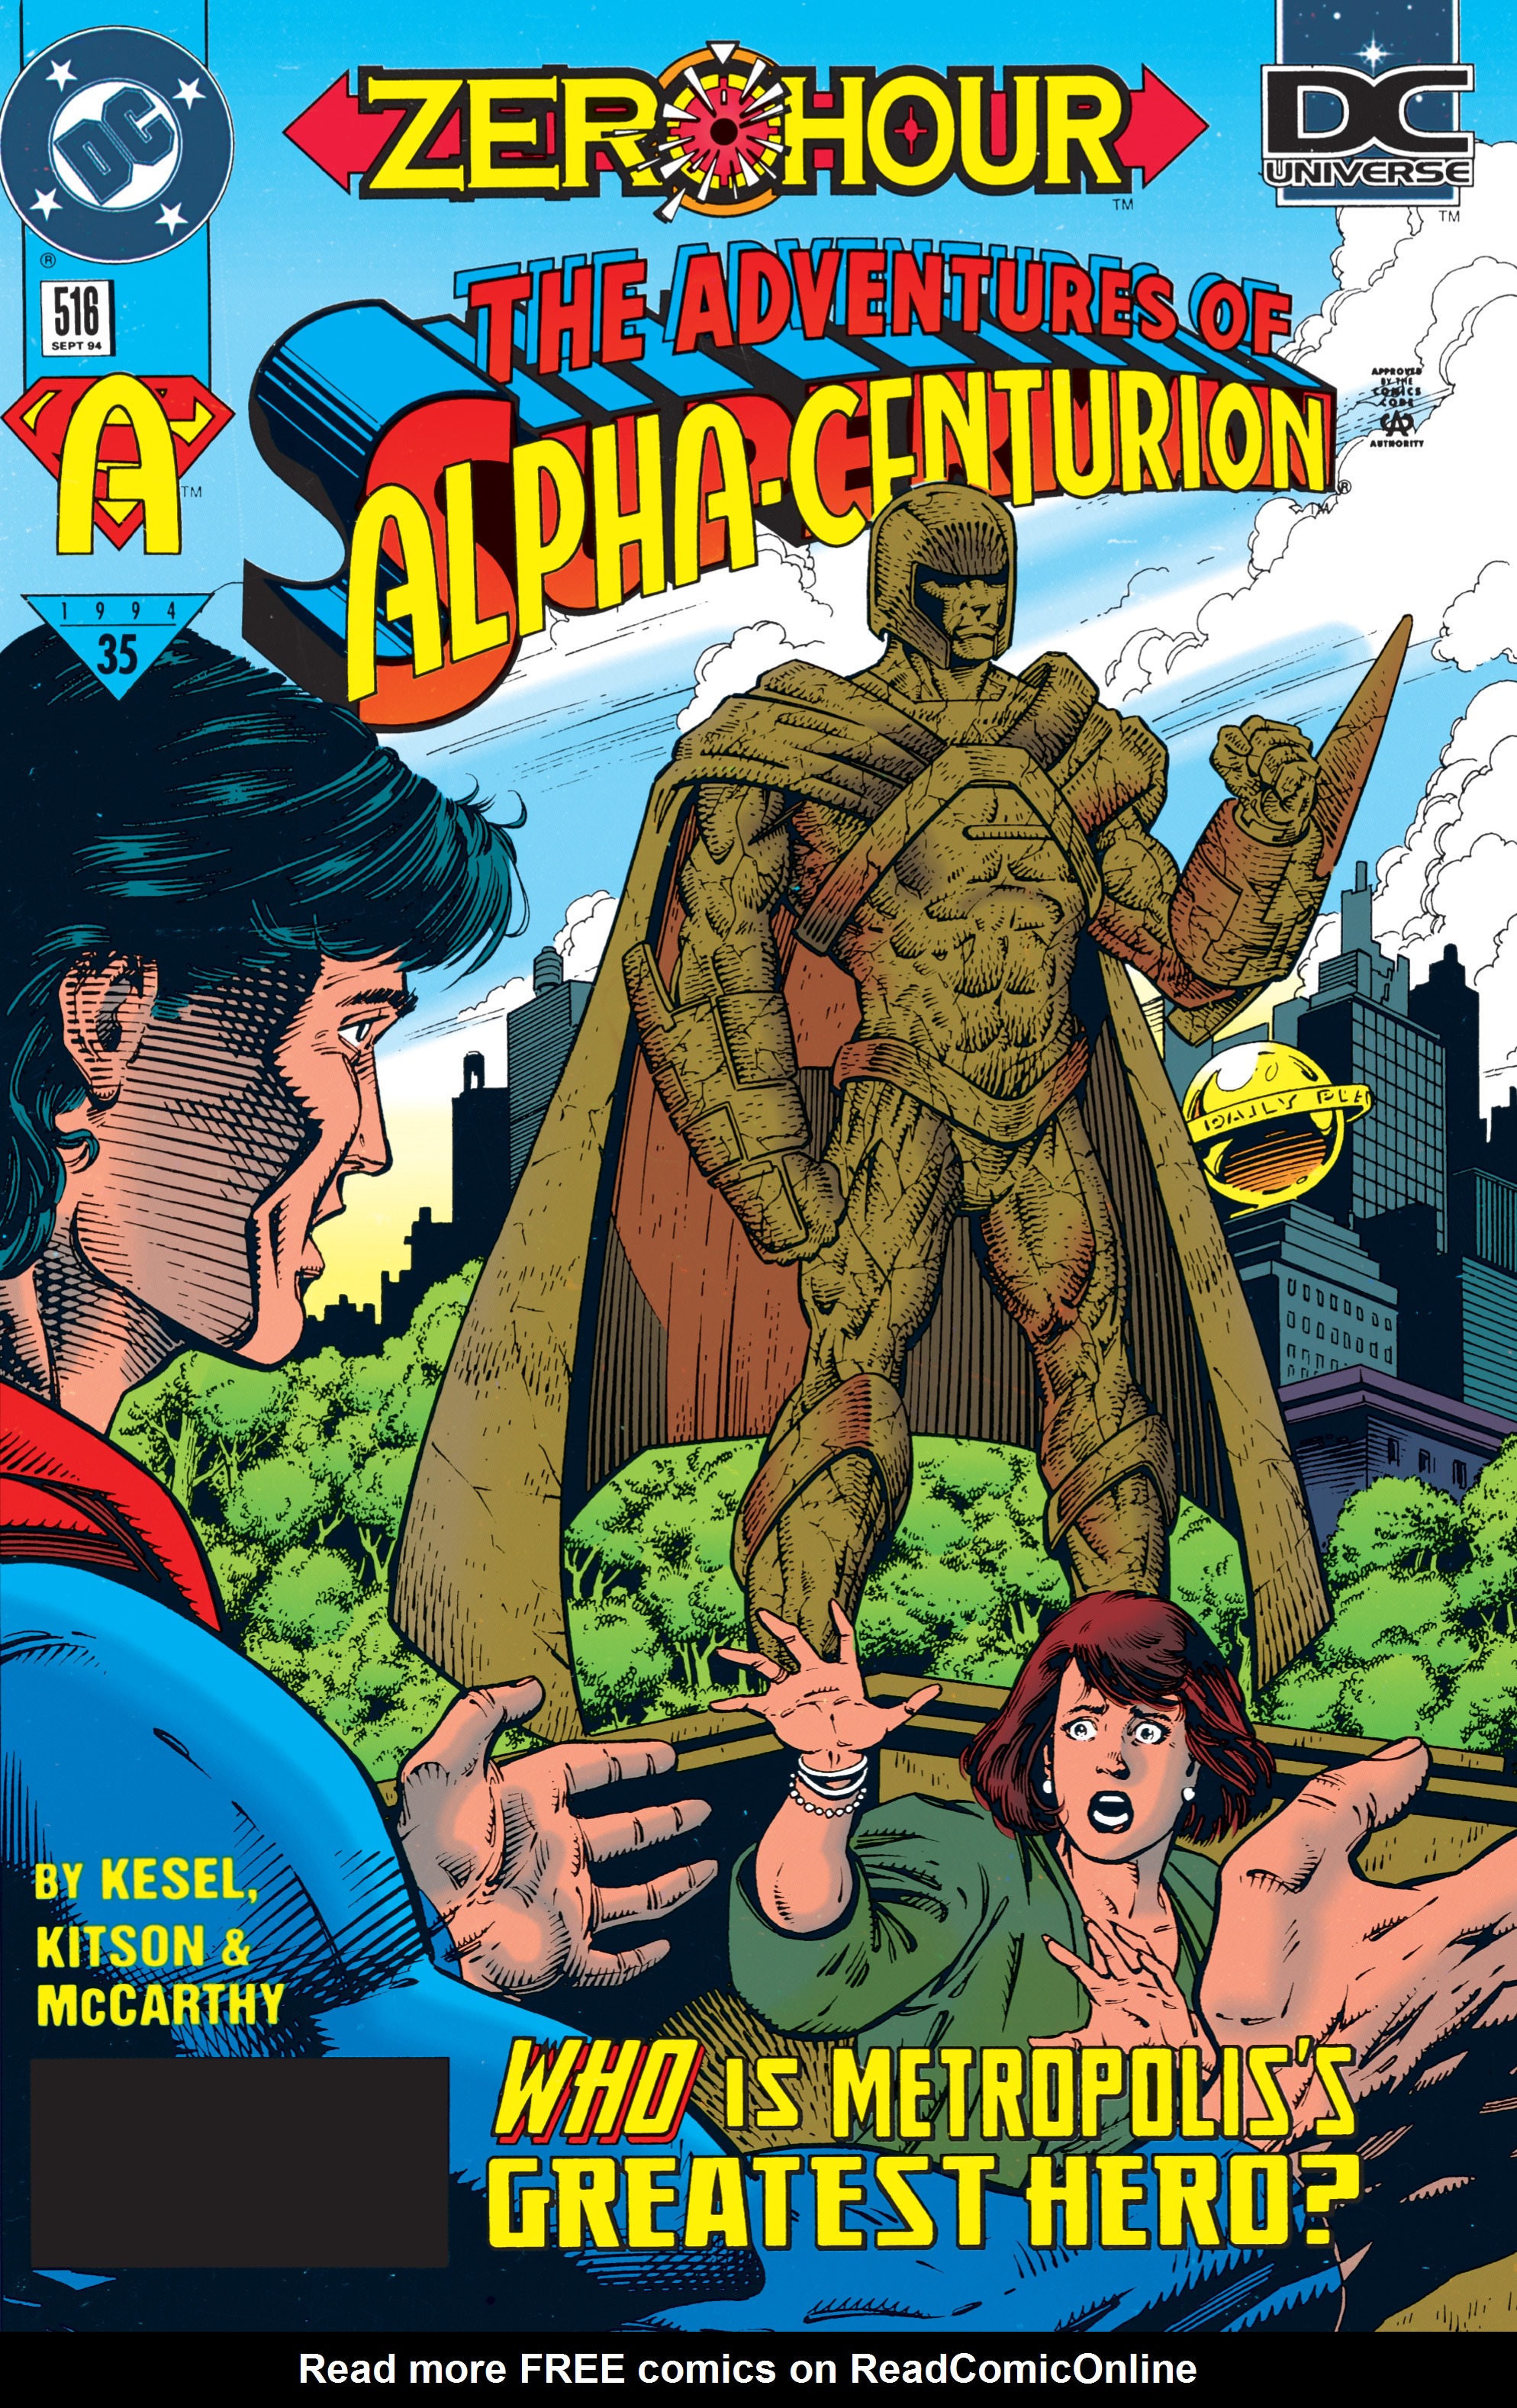 Read online Adventures of Superman (1987) comic -  Issue #516 - 1